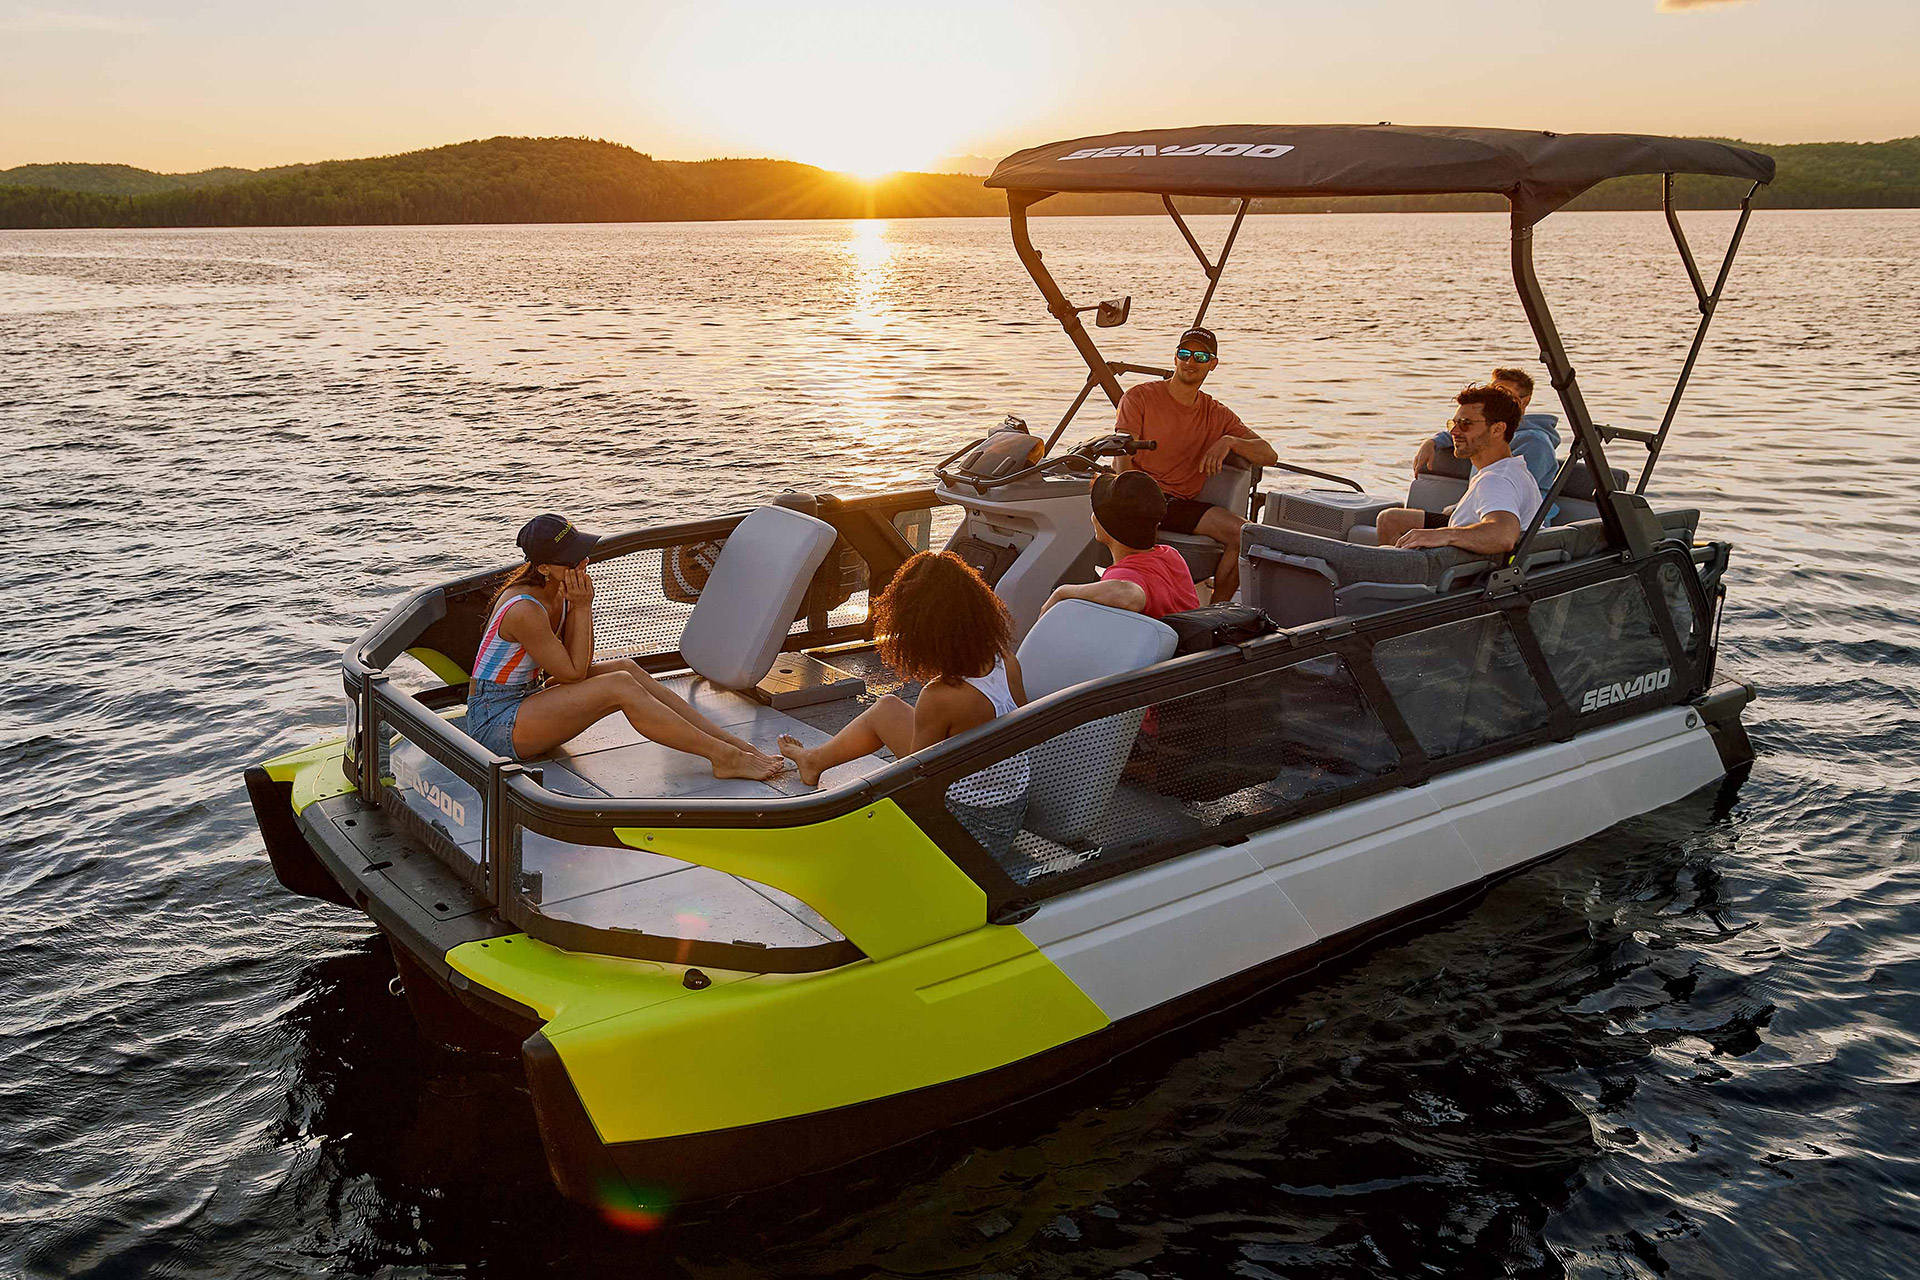 Sea Doo Pontoon Boat: Ultimate Guide for Buyers in 2023